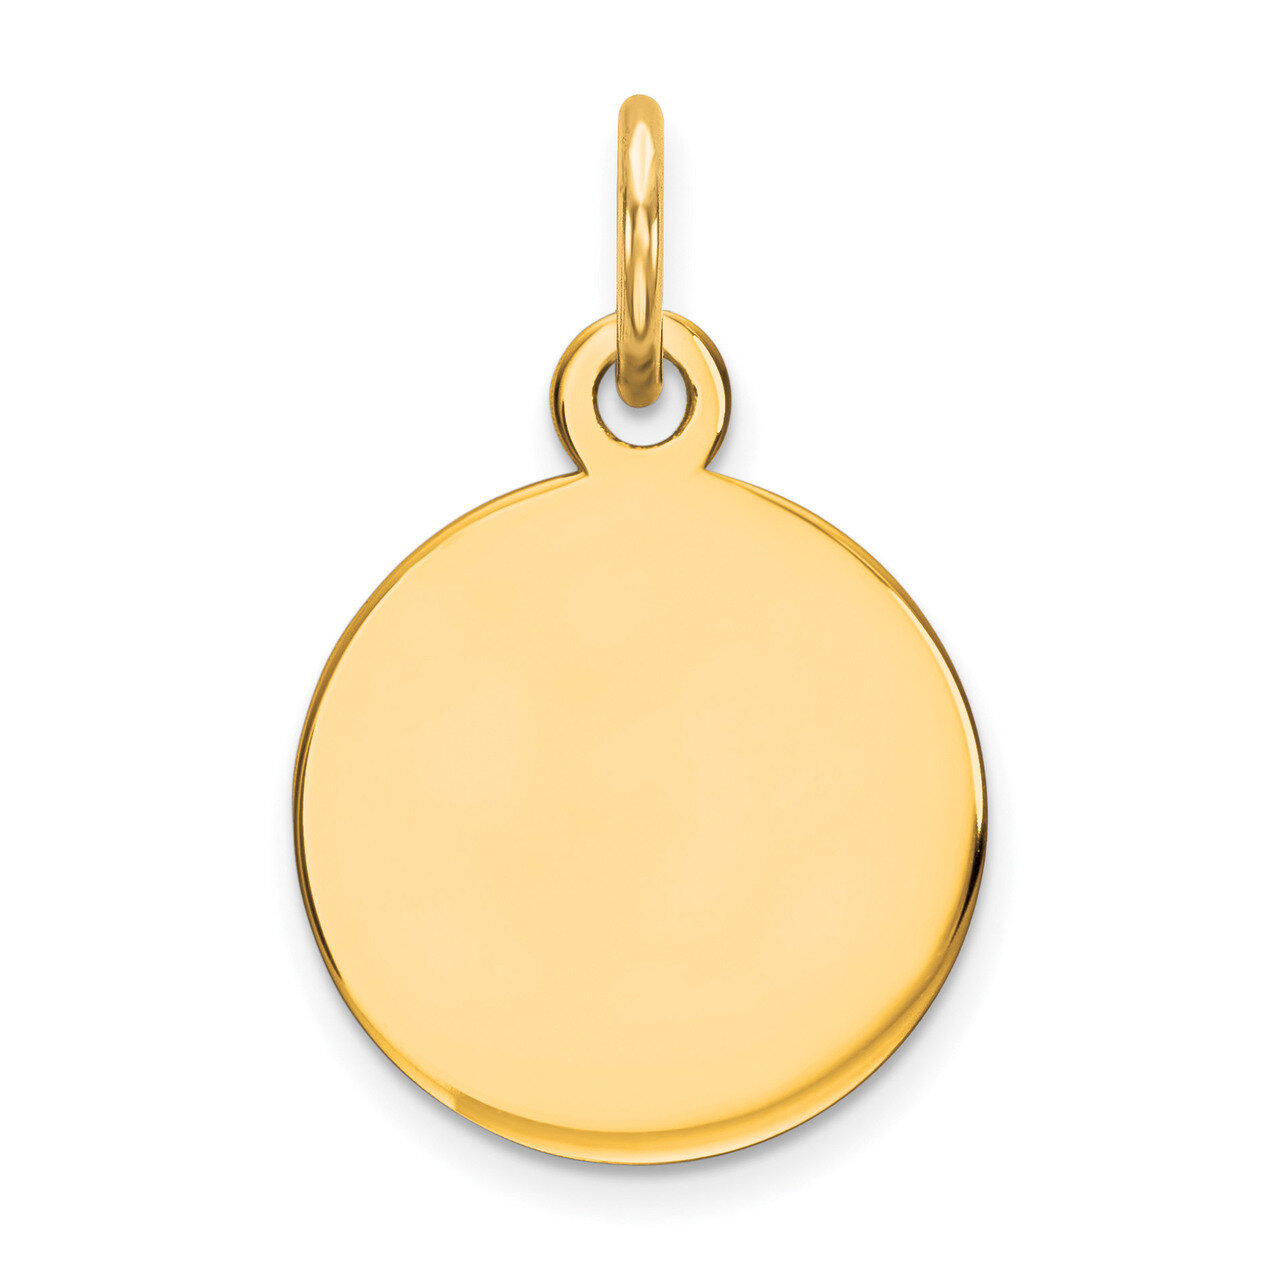 Engravable Round Polished Disc Charm Sterling Silver Gold-plated QM497G/18